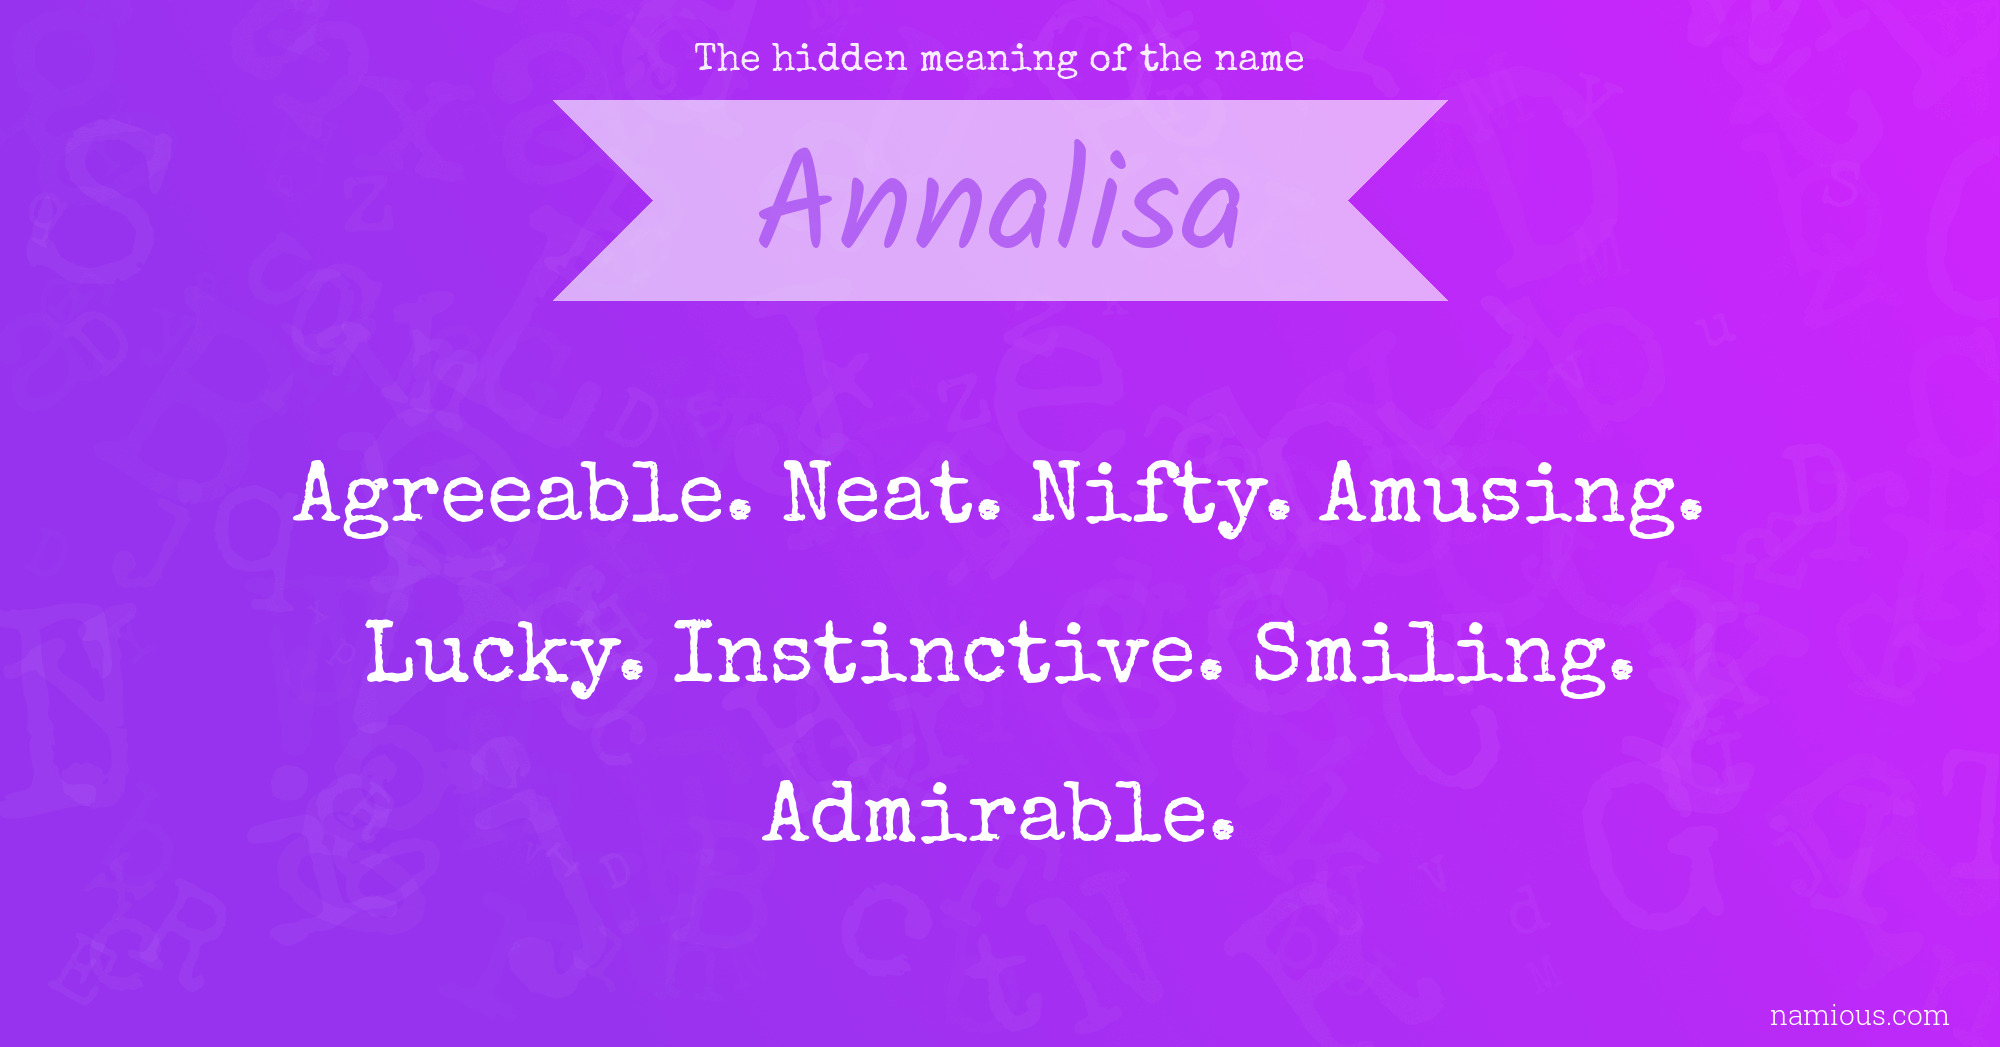 The hidden meaning of the name Annalisa